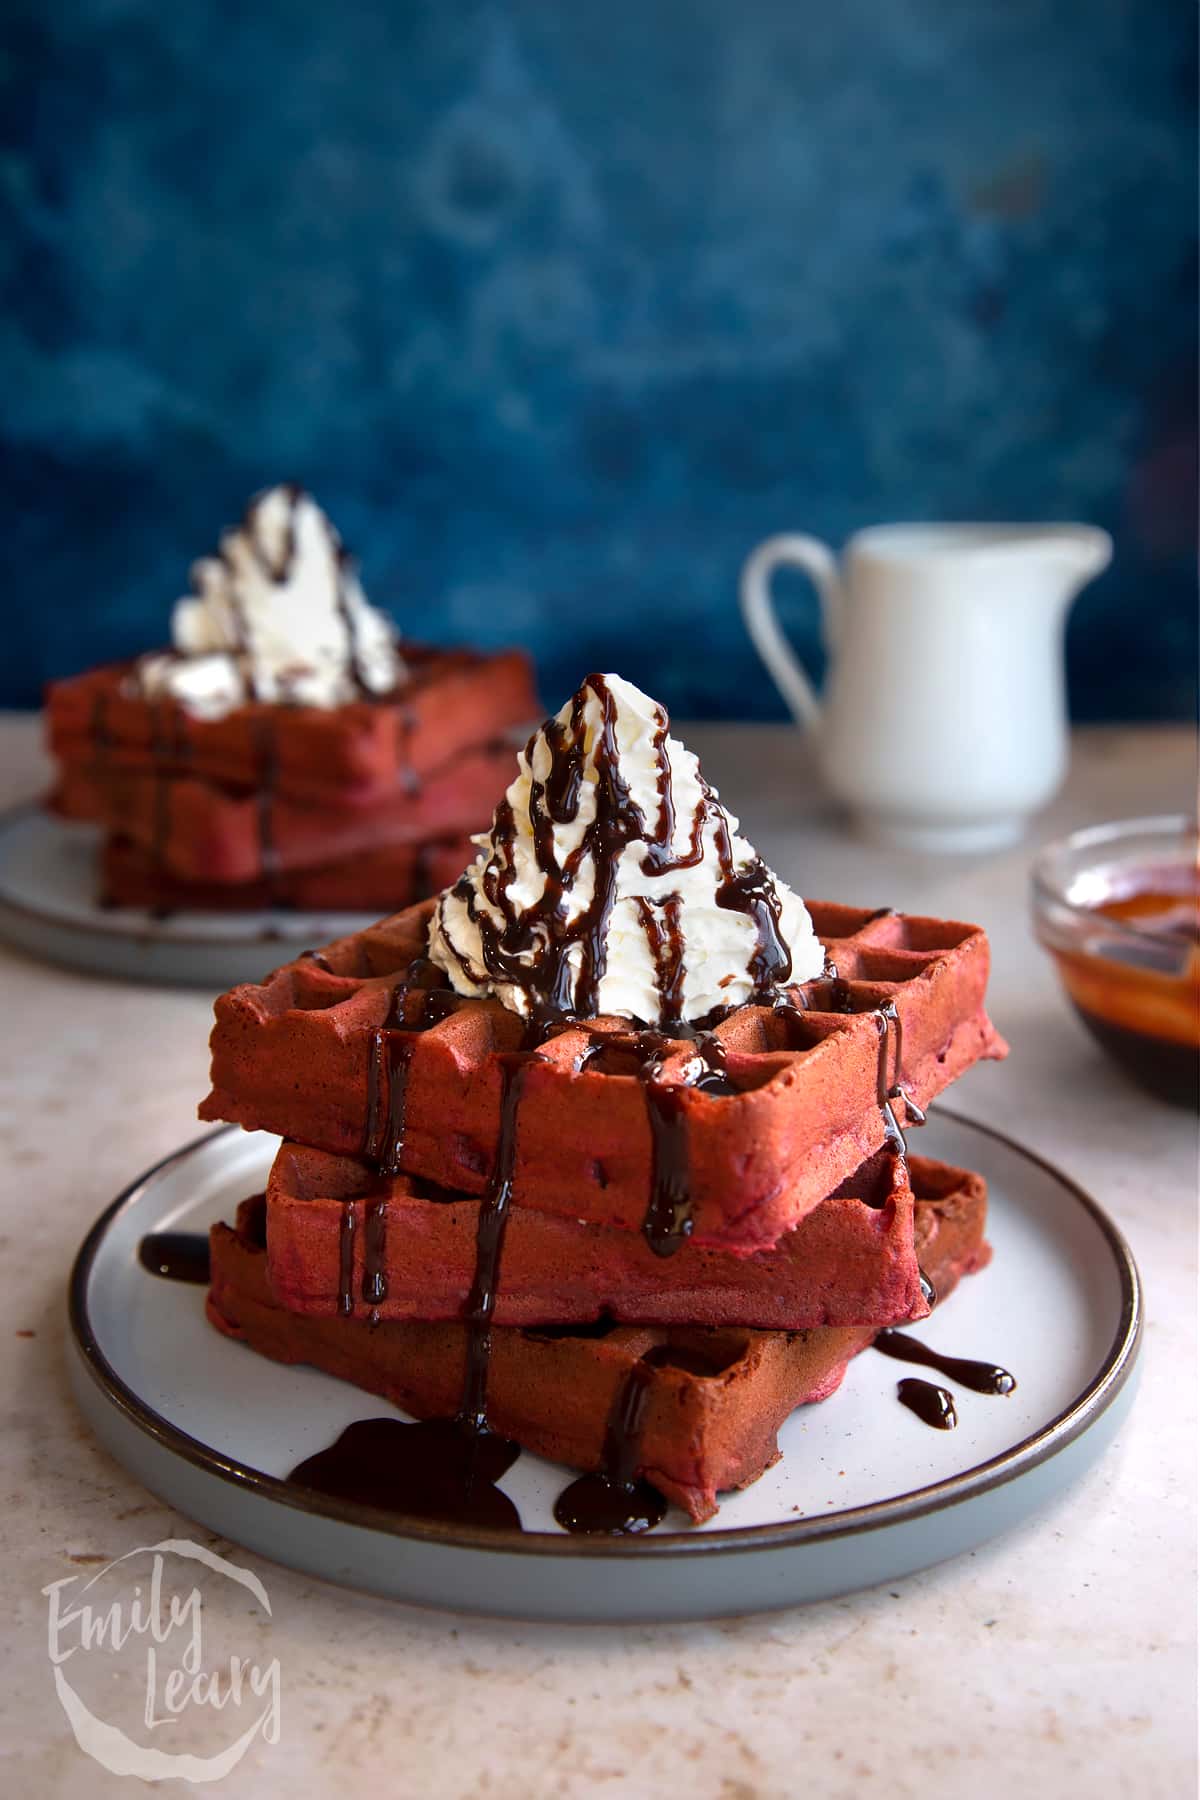 A stack of red velvet waffles served on a decoative plate and topped with whipped cream.